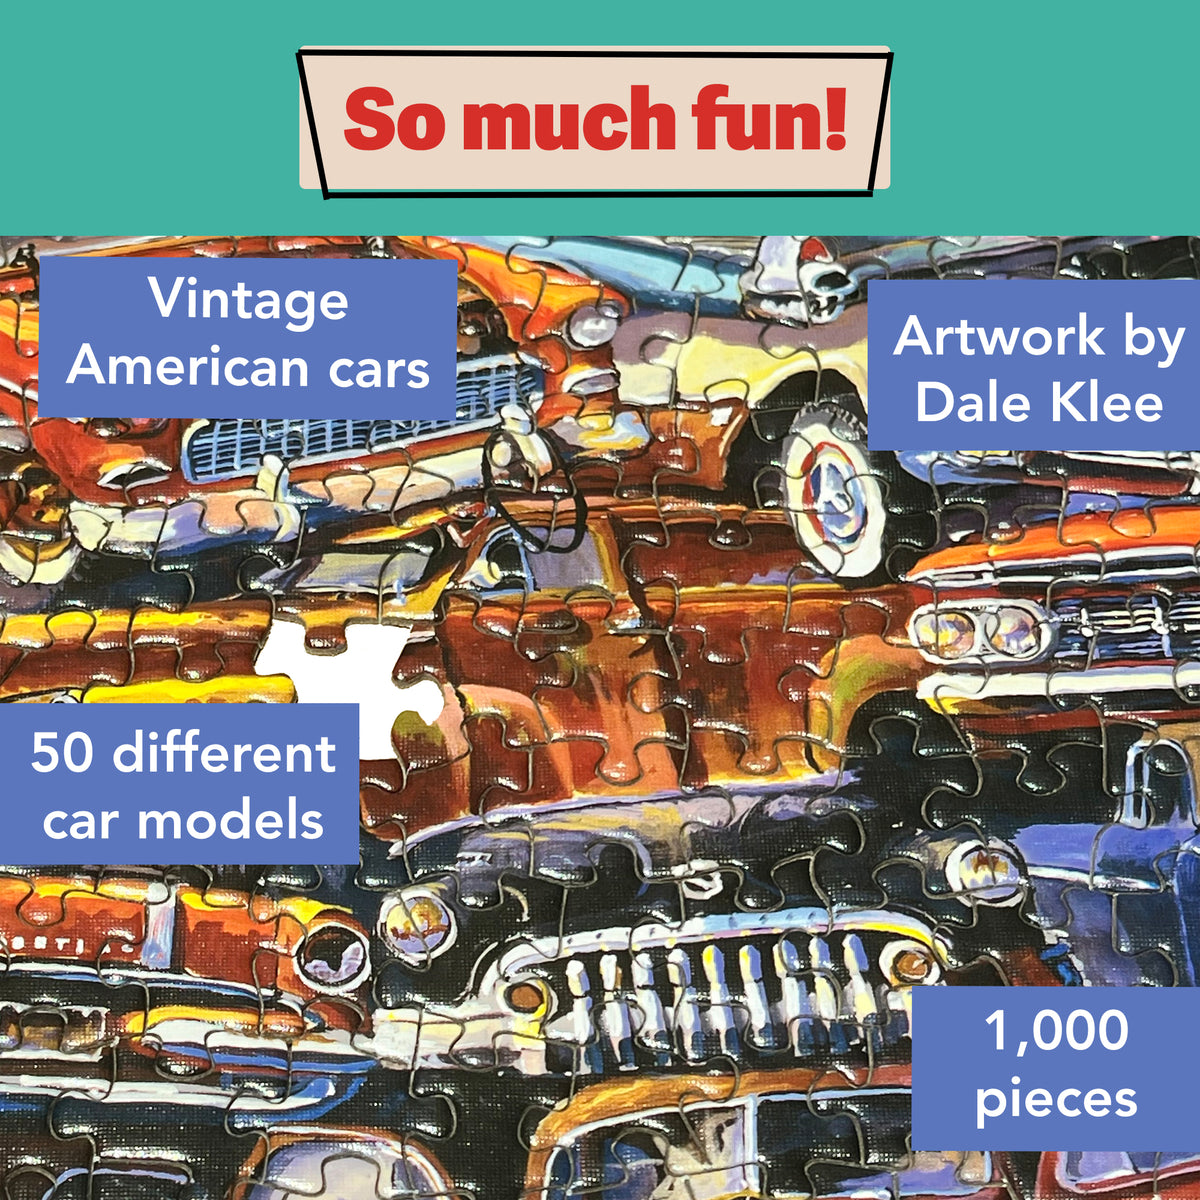 All our Car and Motorcycle jigsaw